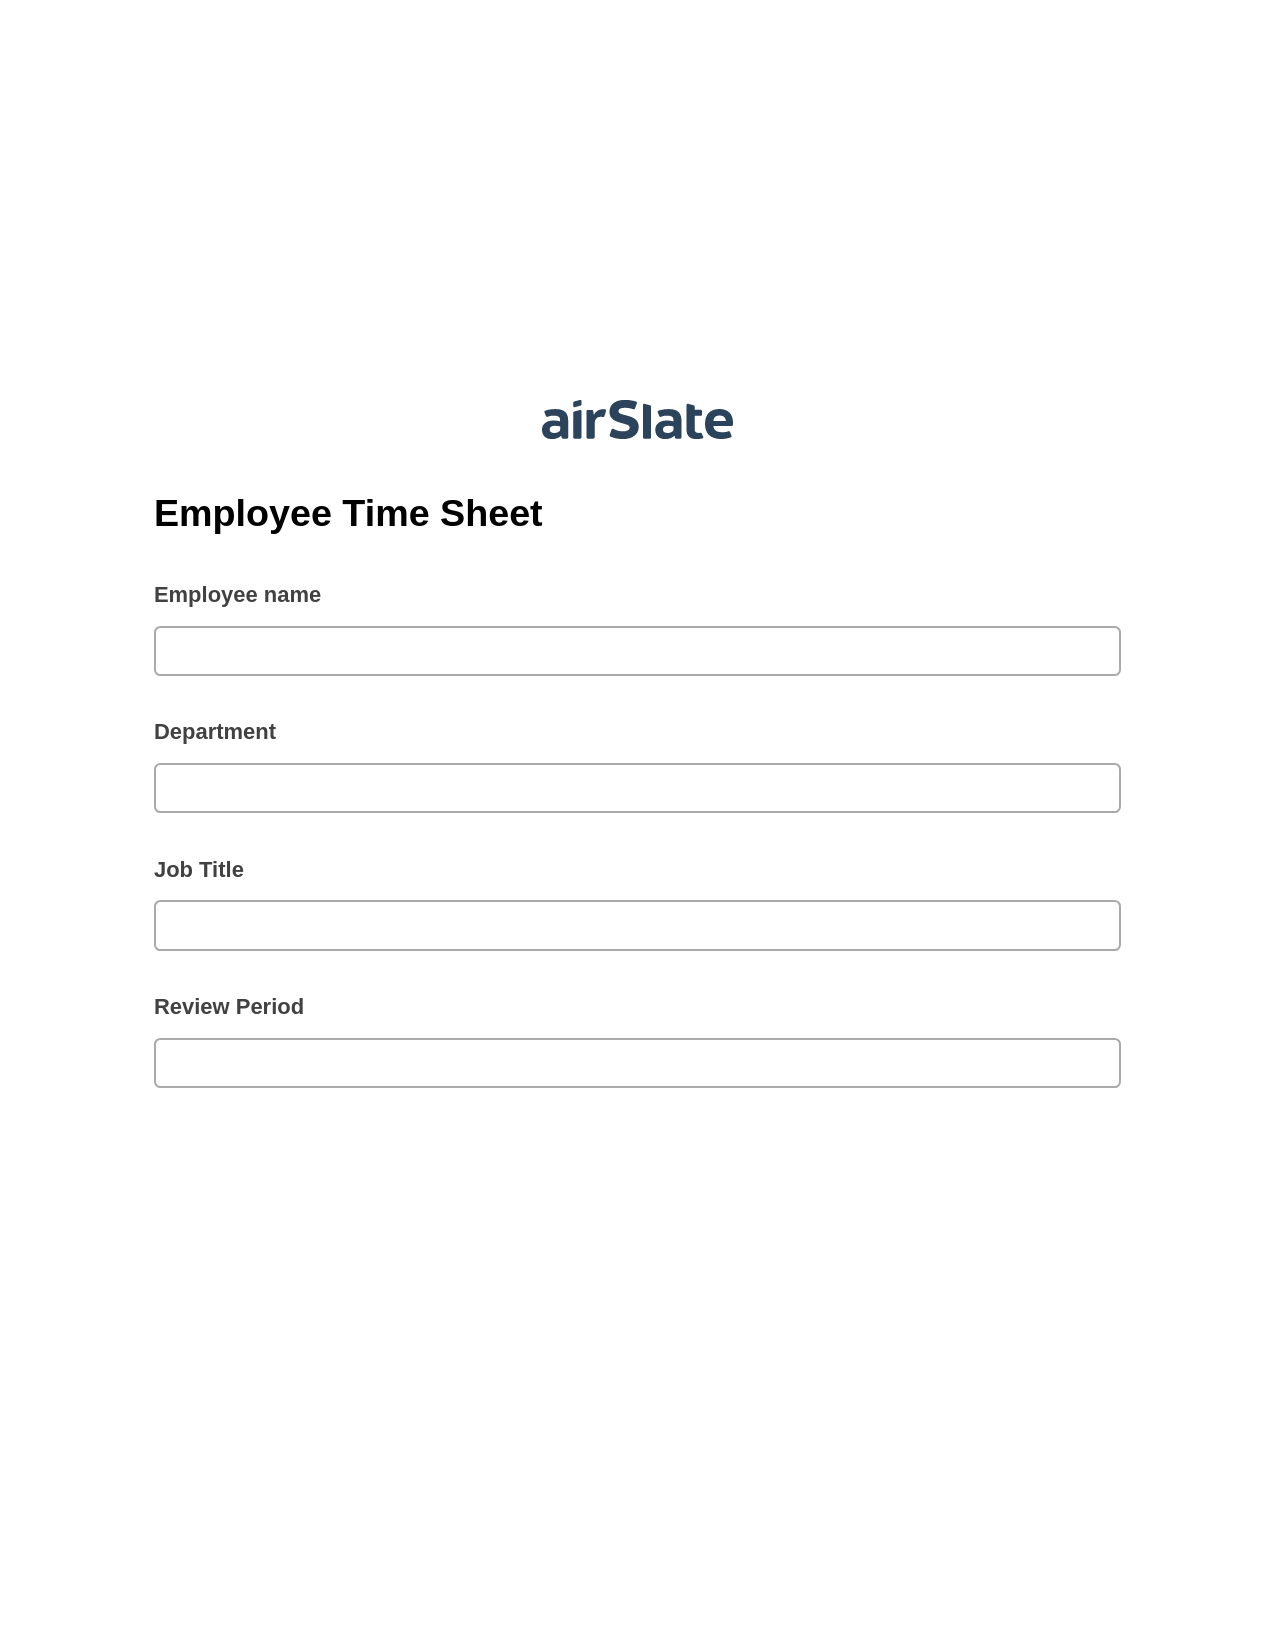 Multirole Employee Time Sheet Pre-fill from another Slate Bot, Create Salesforce Records Bot, Webhook Postfinish Bot